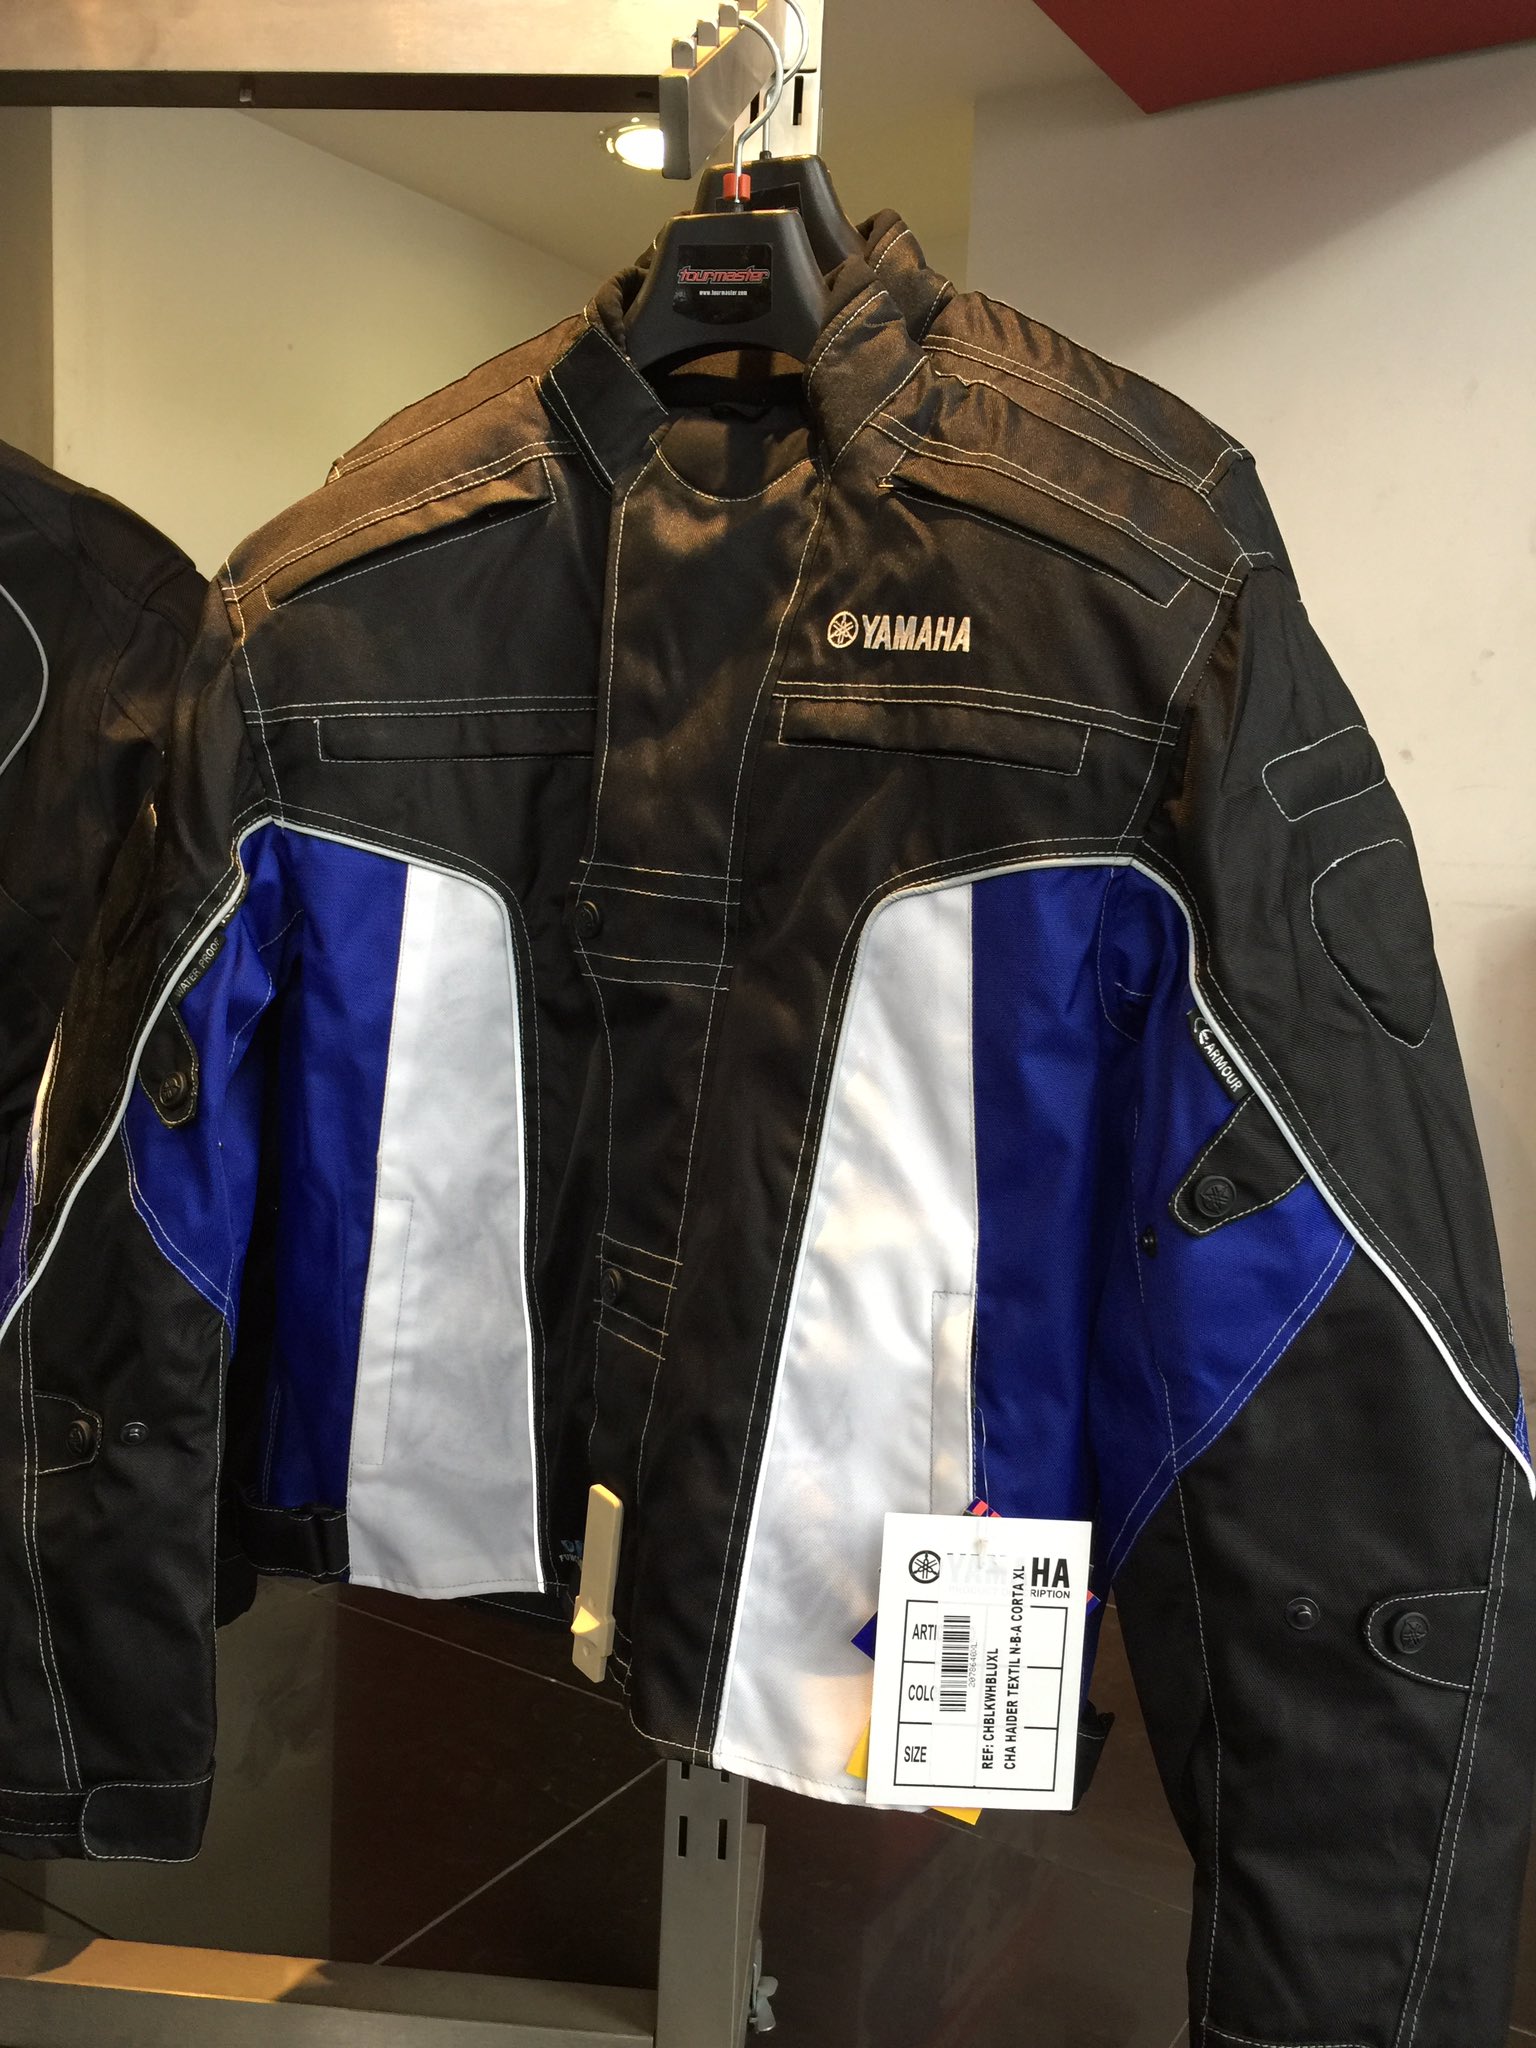 Procircuit yamaha Twitter: "Ven tus chaquetas a Procircuit Manquehue 576 https://t.co/sBYVCHo8Rb" Twitter